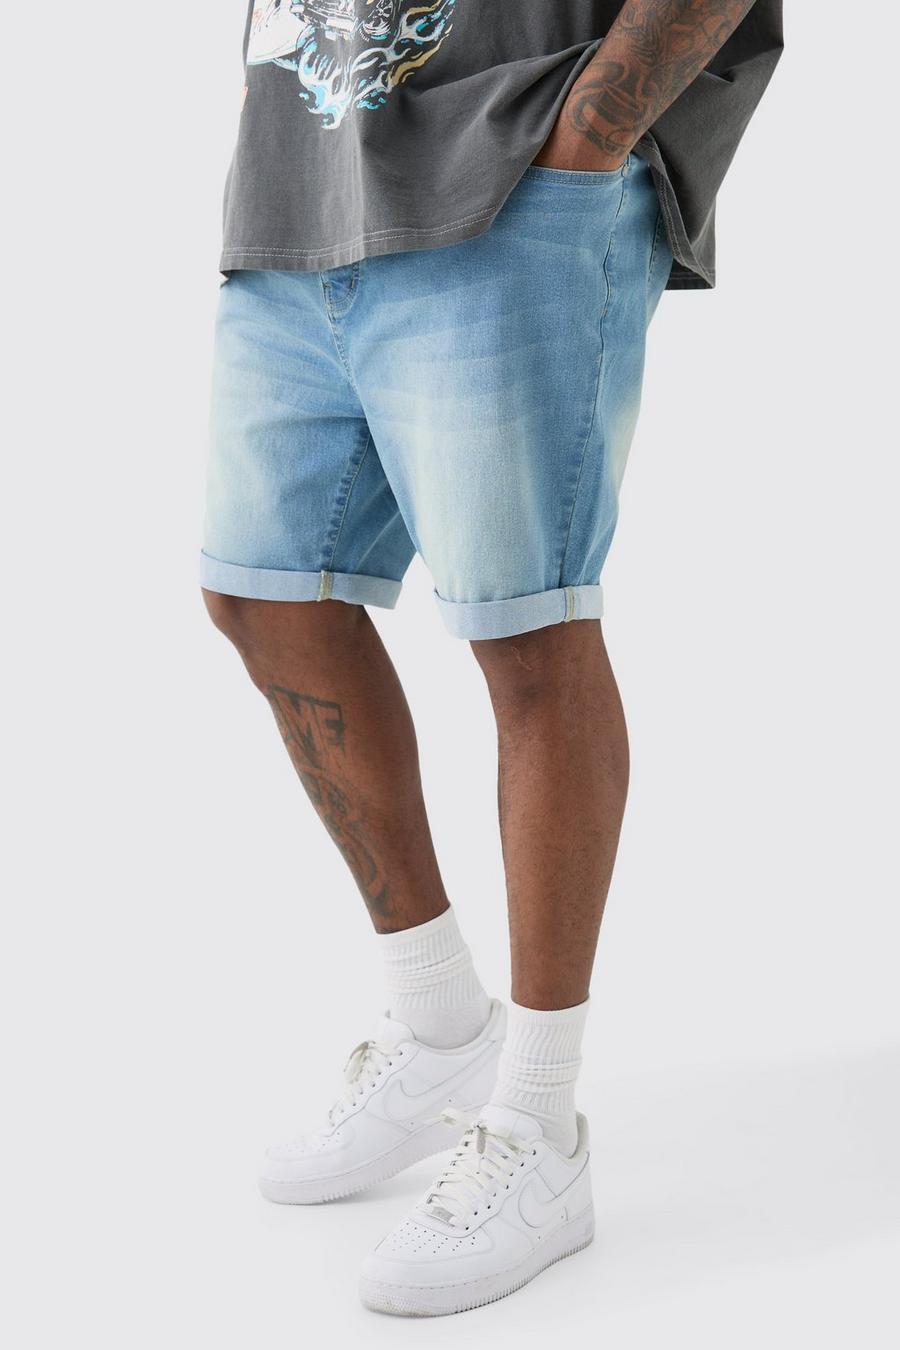 Plus Skinny Stretch Jeansshorts in heller Waschung, Light wash